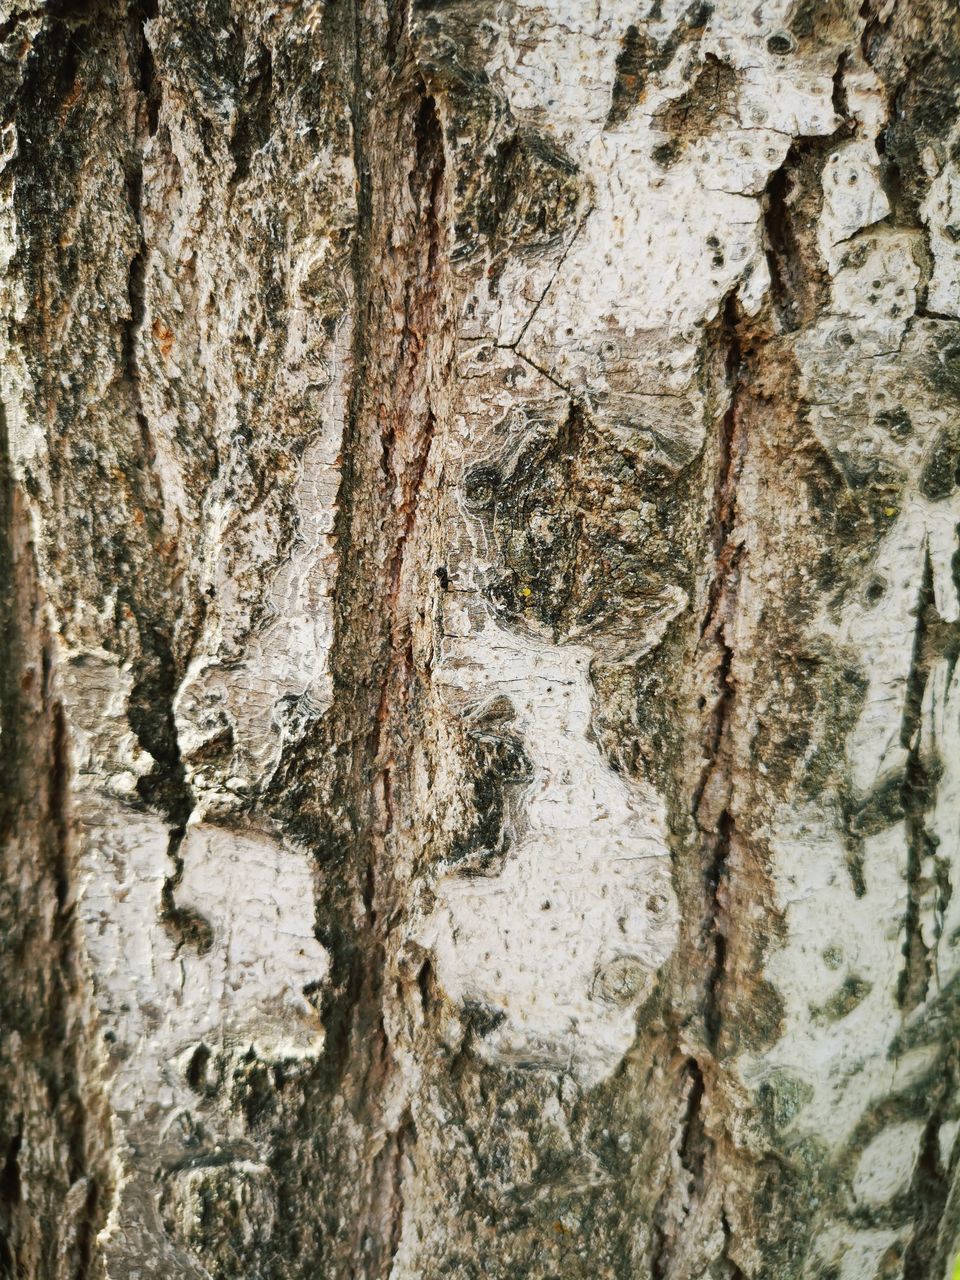 FULL FRAME SHOT OF WEATHERED TREE TRUNK